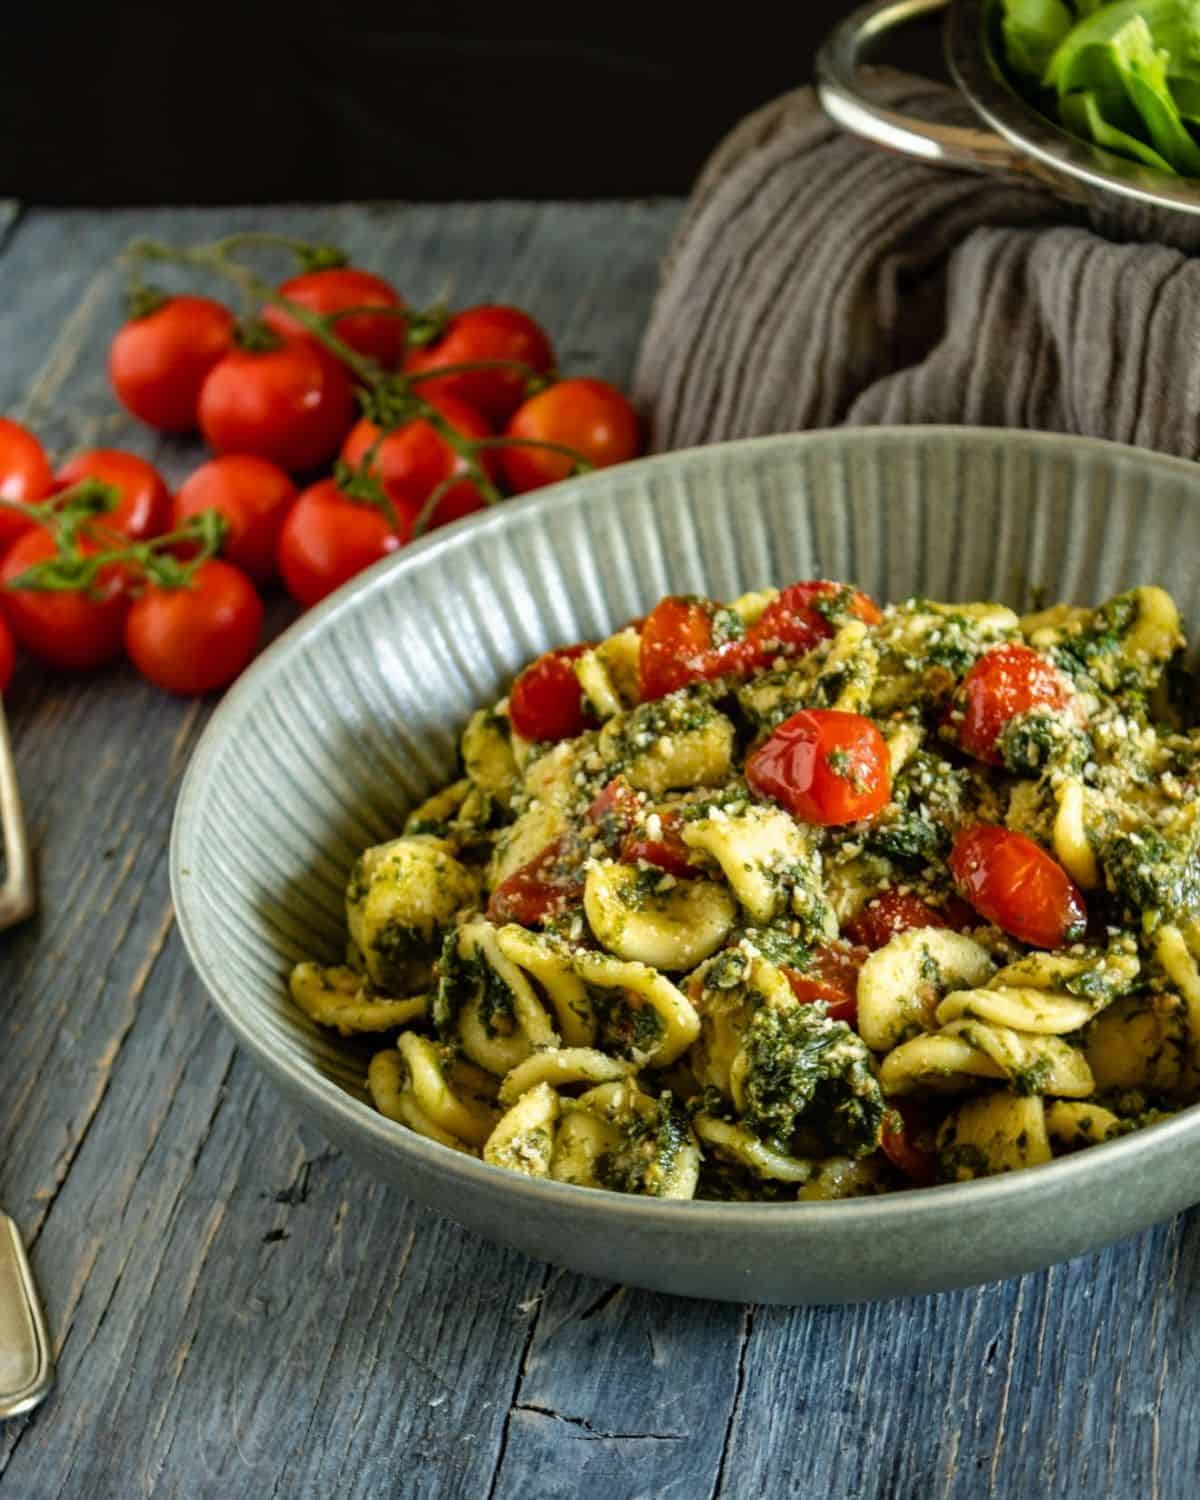 A view of Tuna and Spinach Orecchiette in a grey dish on a blue wooden table. The dish shown fresh cherry tomatoes and spinach on topy. On the side some tomatoes